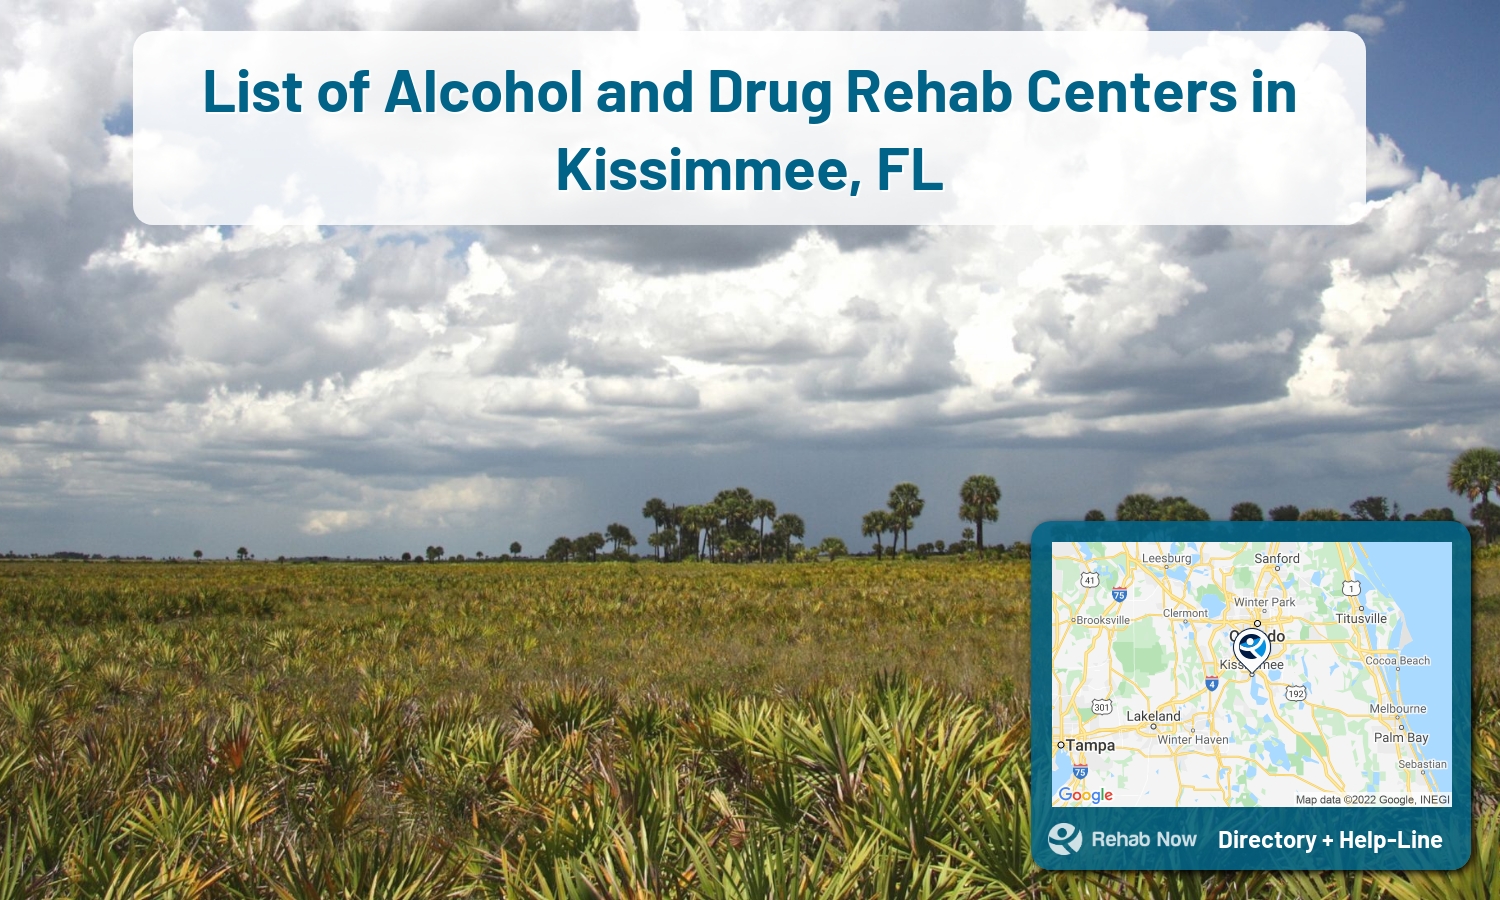 Kissimmee, FL Treatment Centers. Find drug rehab in Kissimmee, Florida, or detox and treatment programs. Get the right help now!